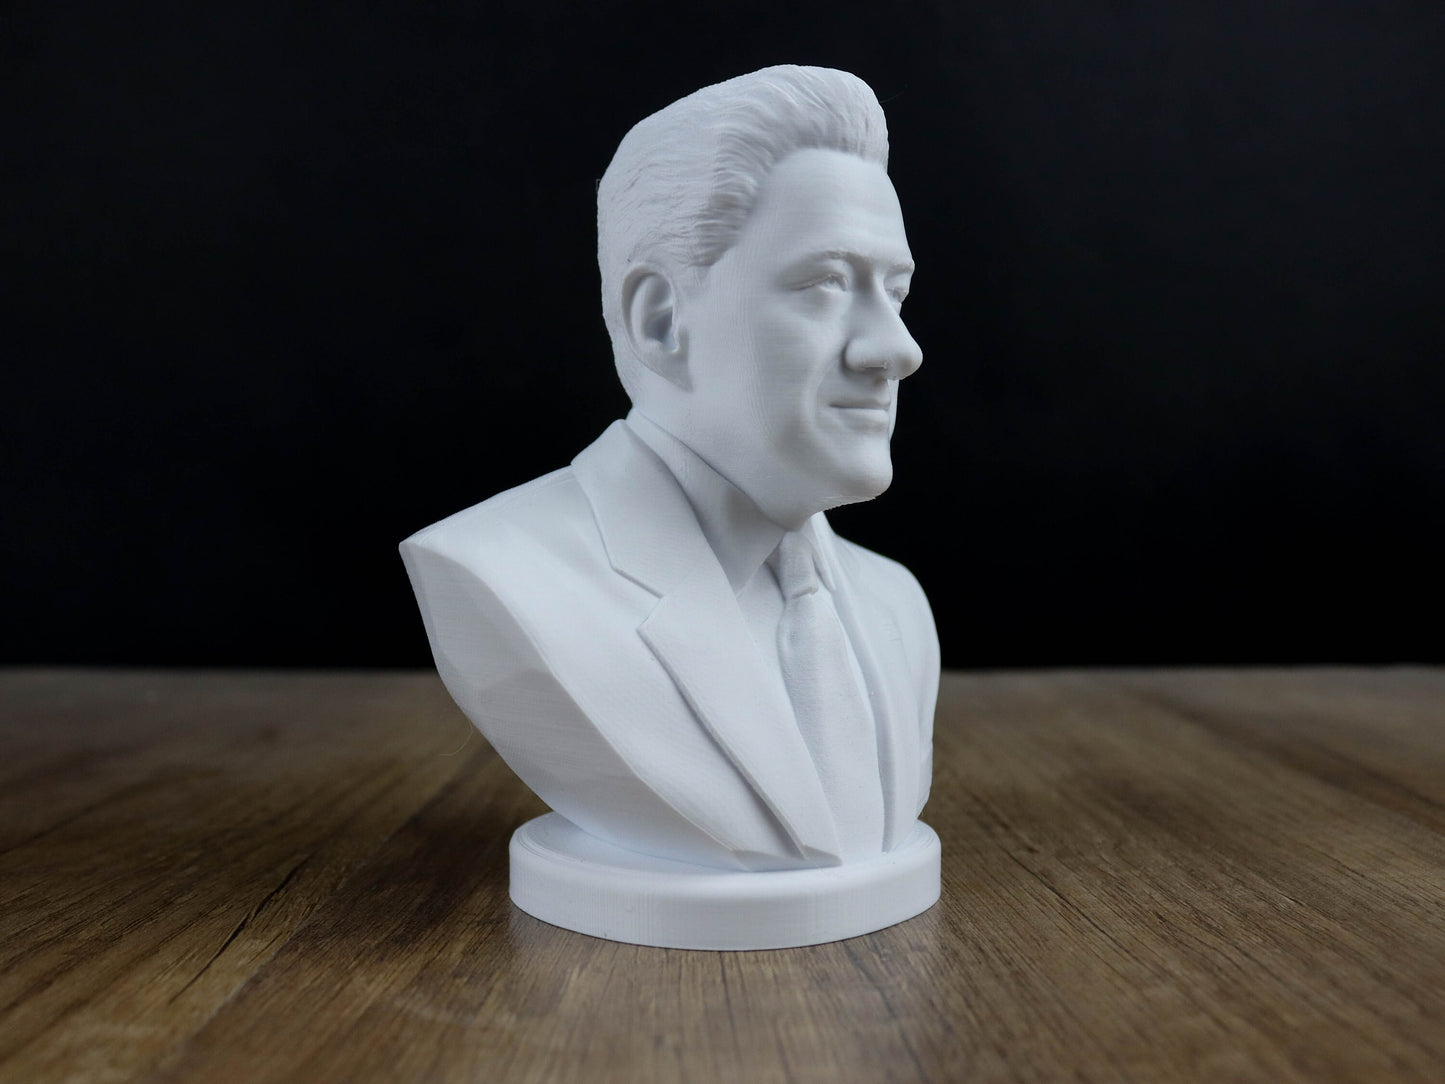 Bill Clinton Bust, 42nd president of the United States 3d Sculpture